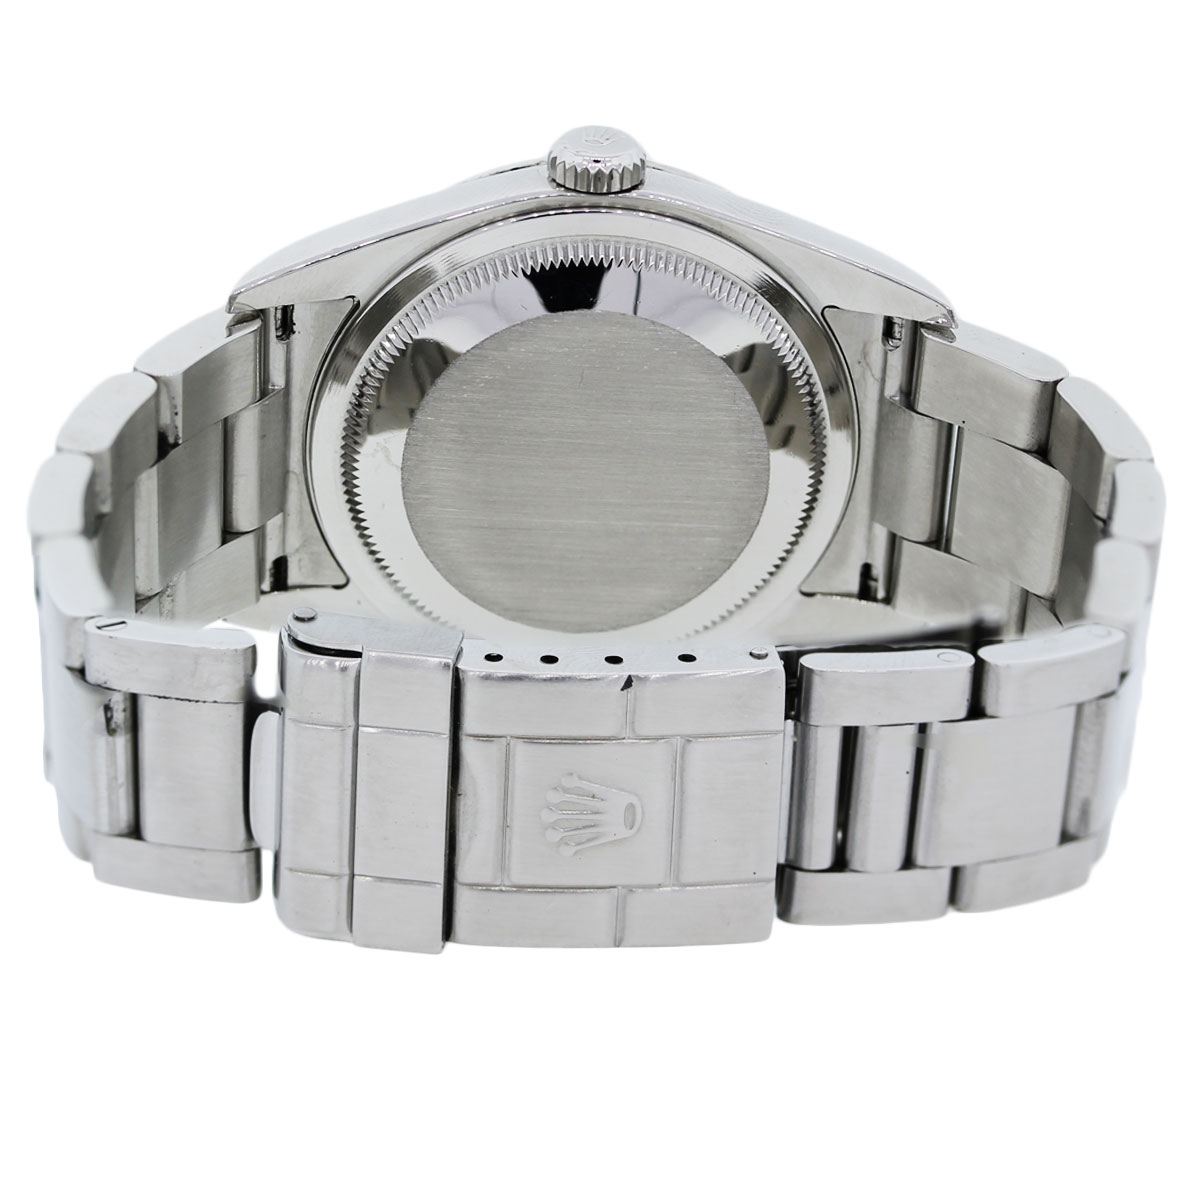 Rolex Oyster Perpetual Explorer I 214270 Stainless Steel Mens Watch